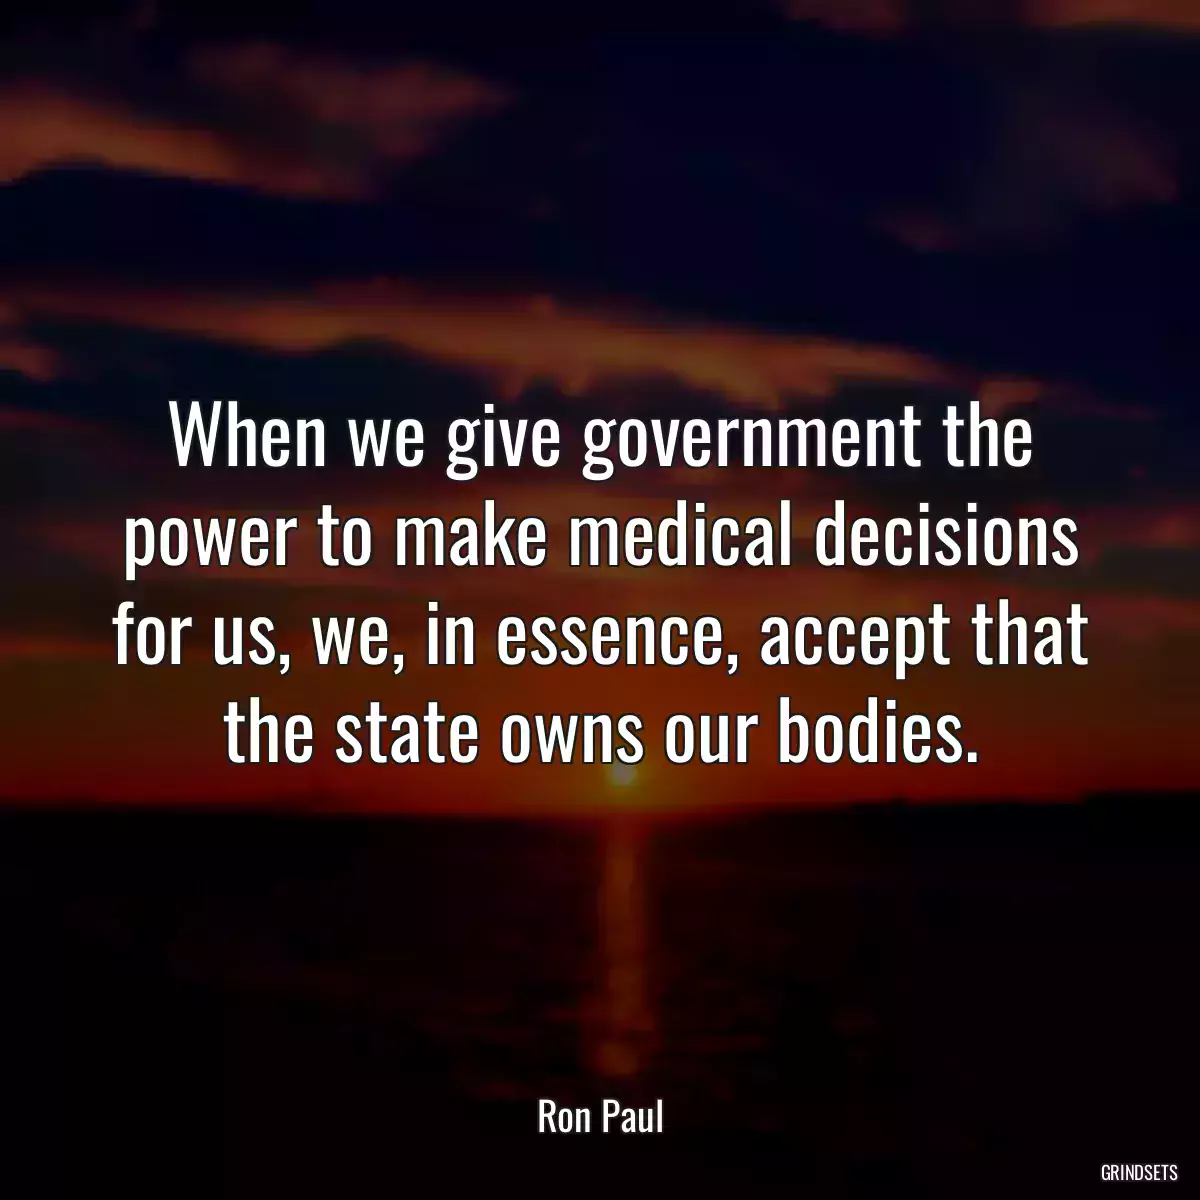 When we give government the power to make medical decisions for us, we, in essence, accept that the state owns our bodies.